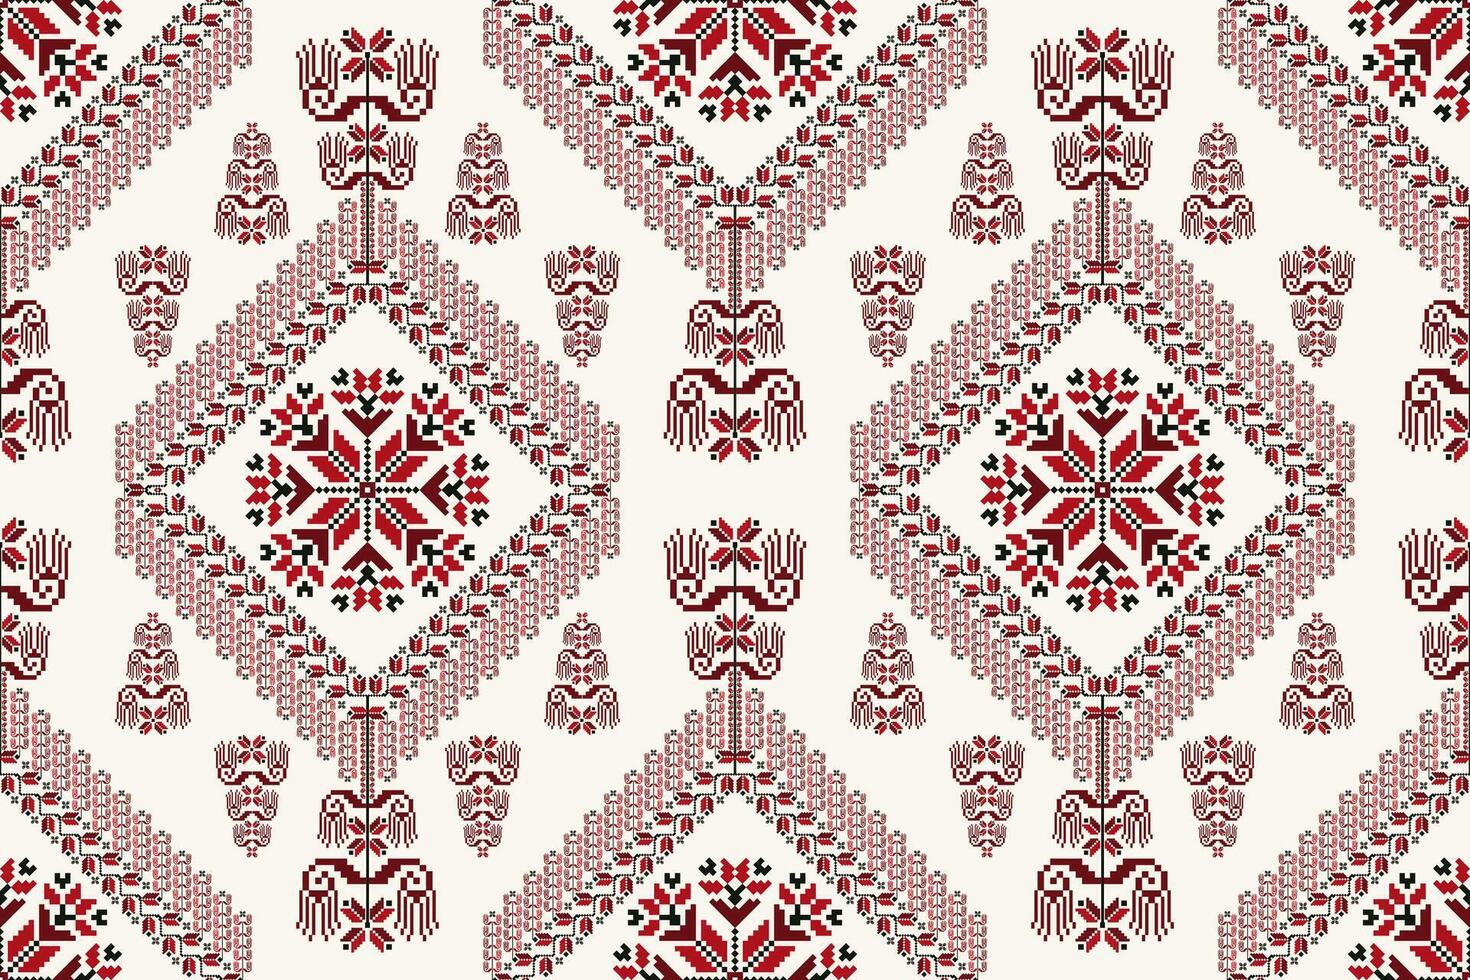 Folk floral embroidery pattern. Folk embroidery geometric floral shape seamless pattern. Floral cross stitch pattern use for fabric, textile, home decoration elements, upholstery, wrapping, etc vector